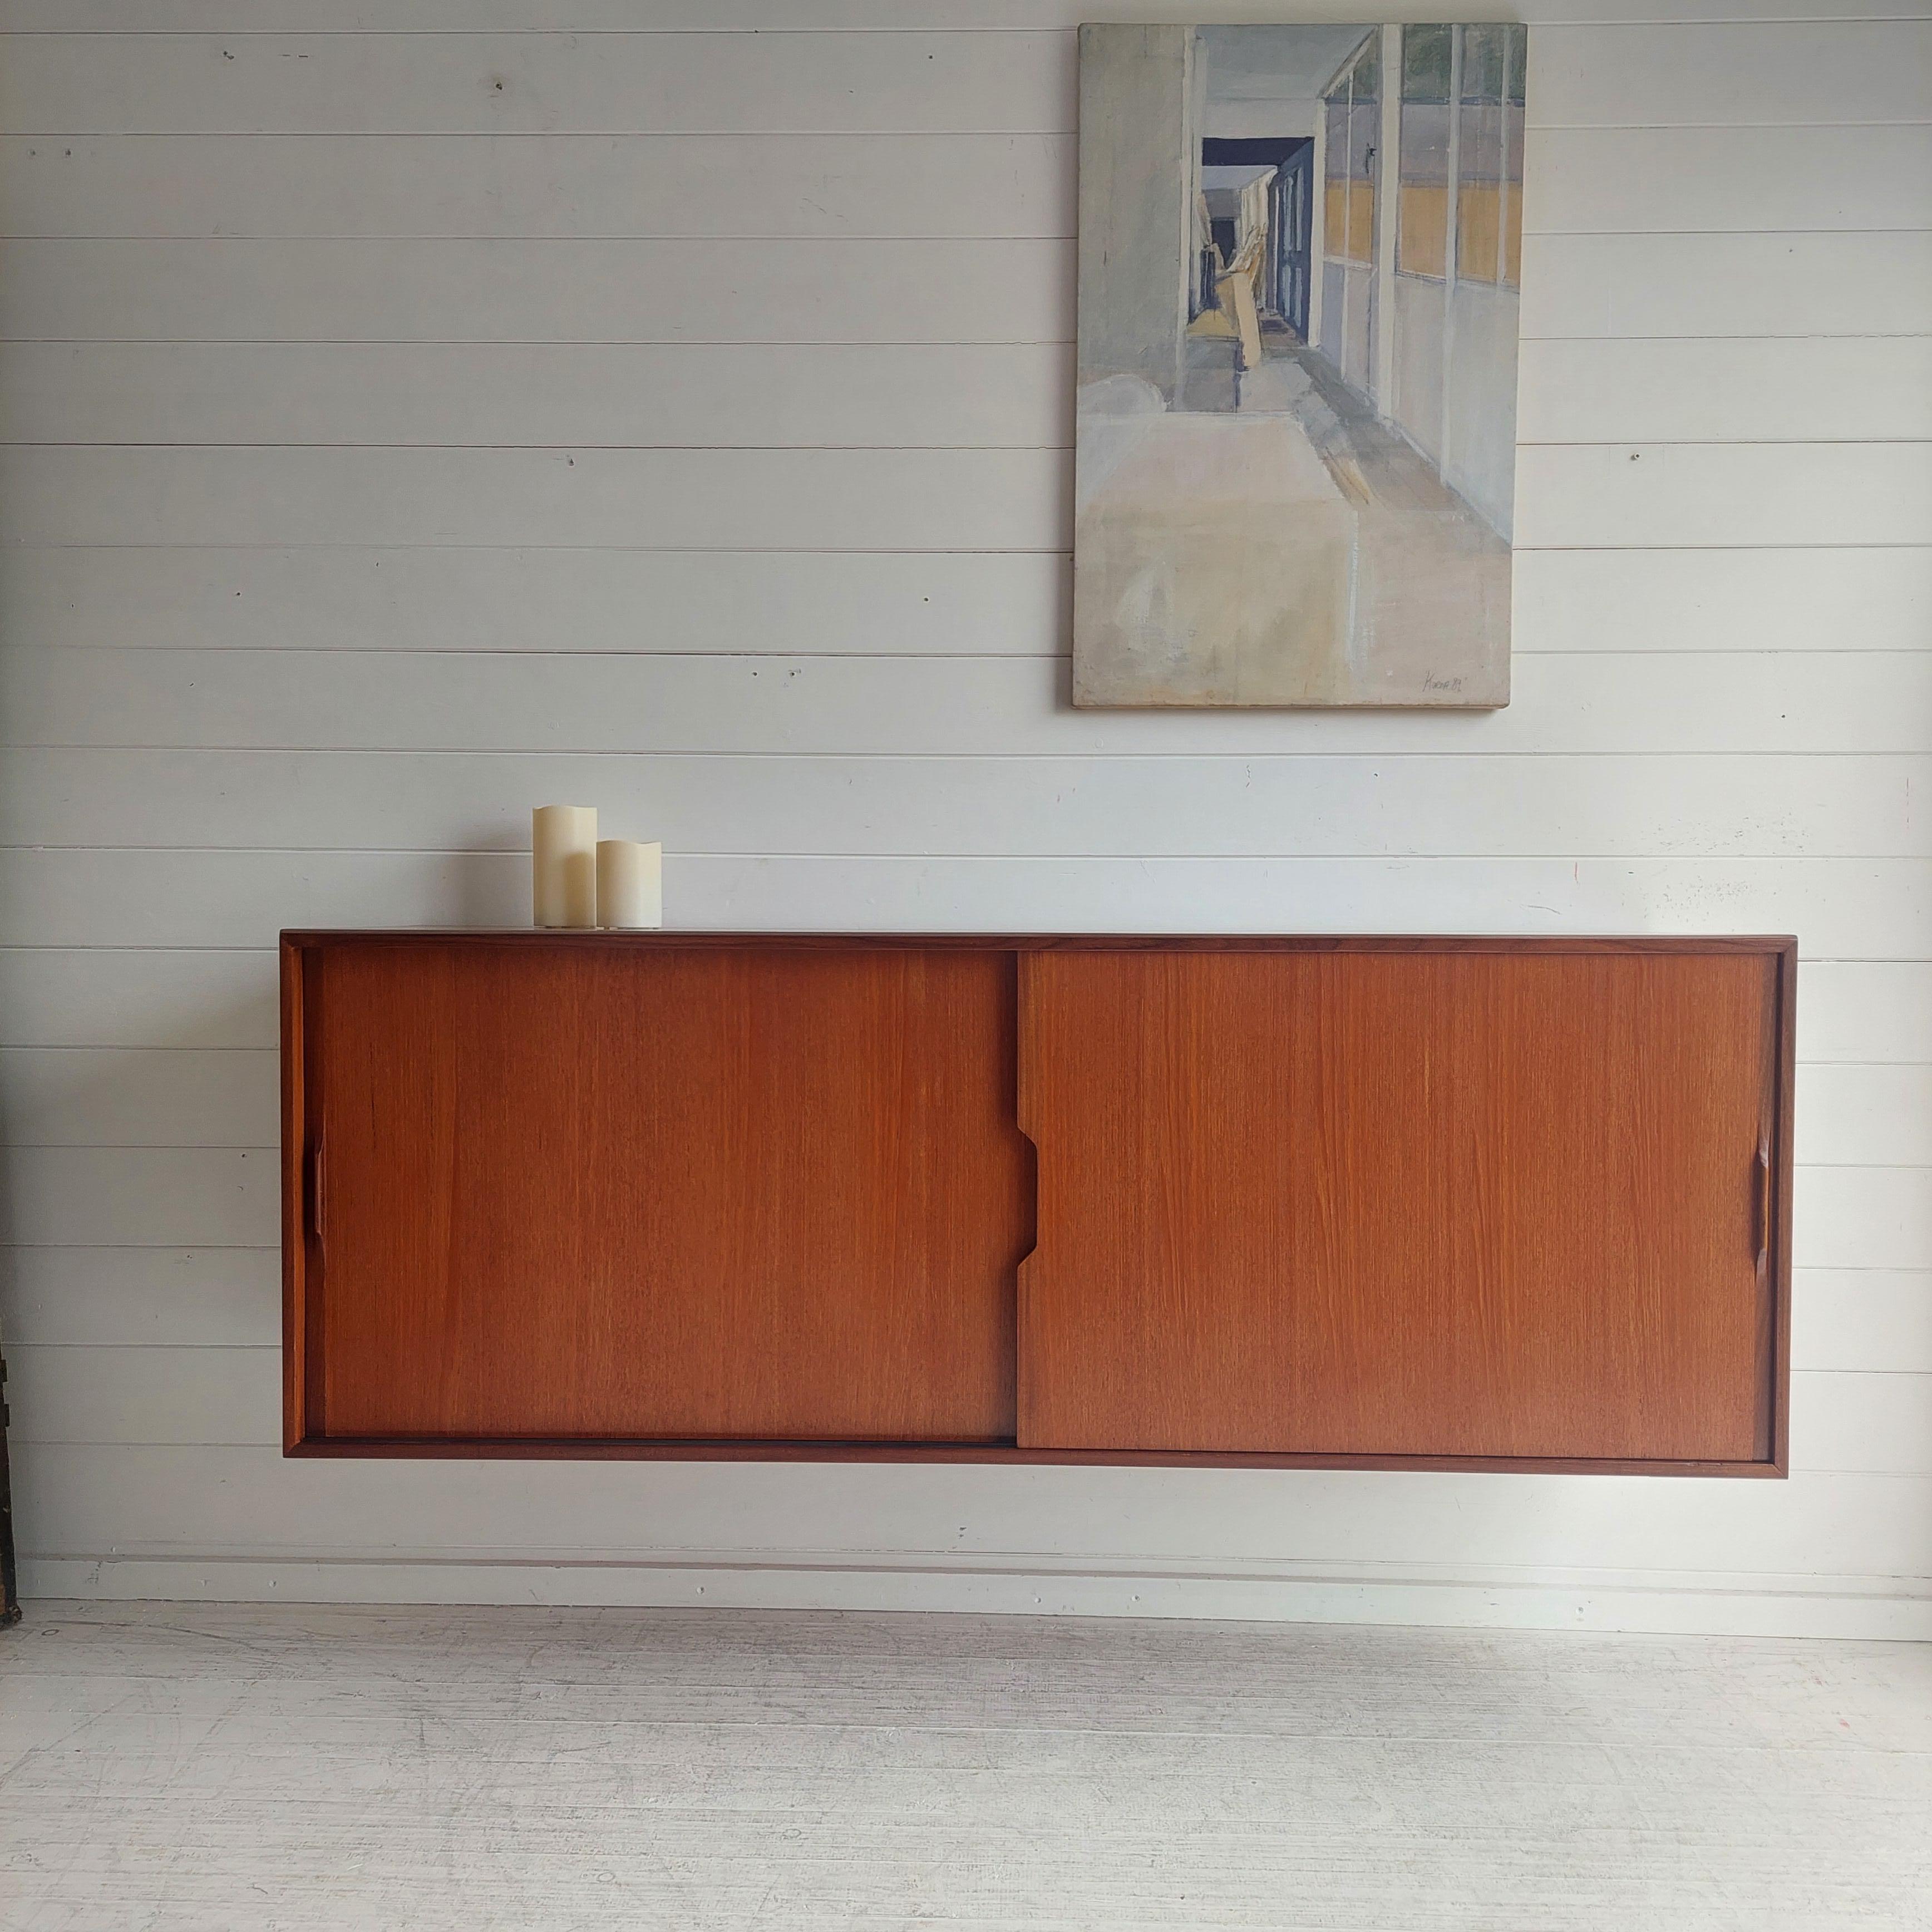 Danish Modern Teak Floating Credenza Sideboard  in the style of Skovby, c. 1960s

Beautifully made with nice detailing 
Made most probably in Denmark, this beautiful teak credenza is sure to receive plenty of compliments. 
Perfect  in size (142.5 cm